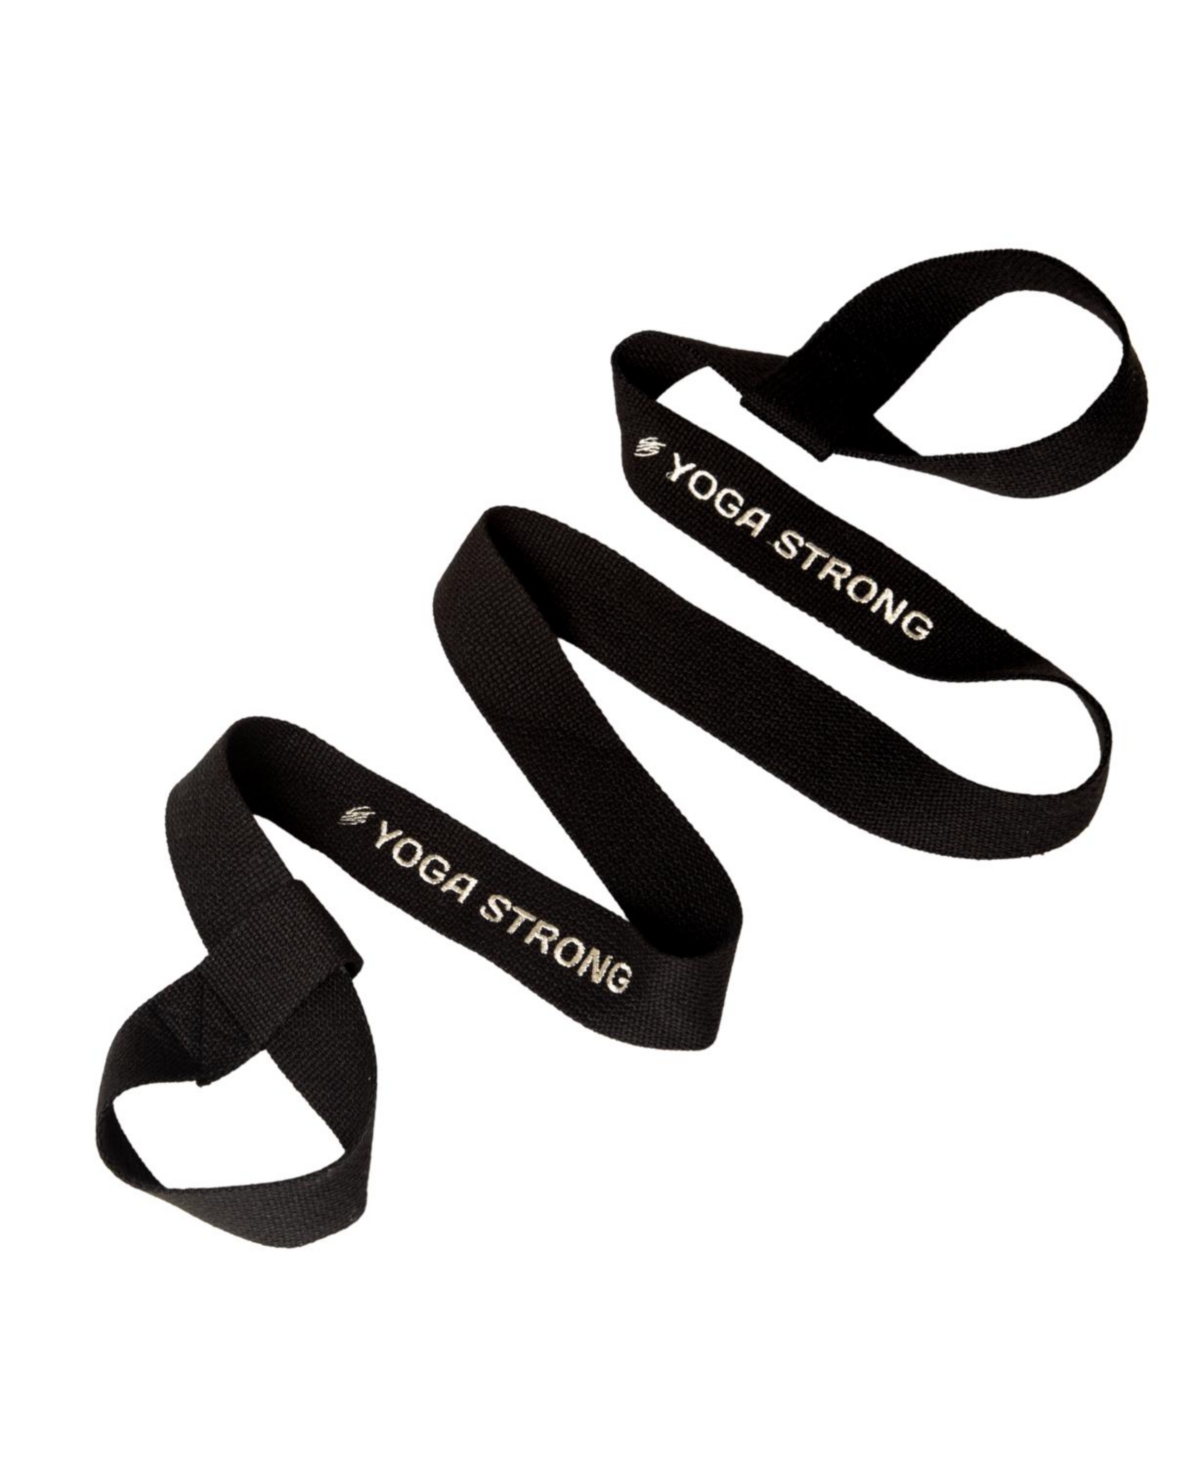 Stretch & Carry Strap with Durable & Adjustable End Loops - Black